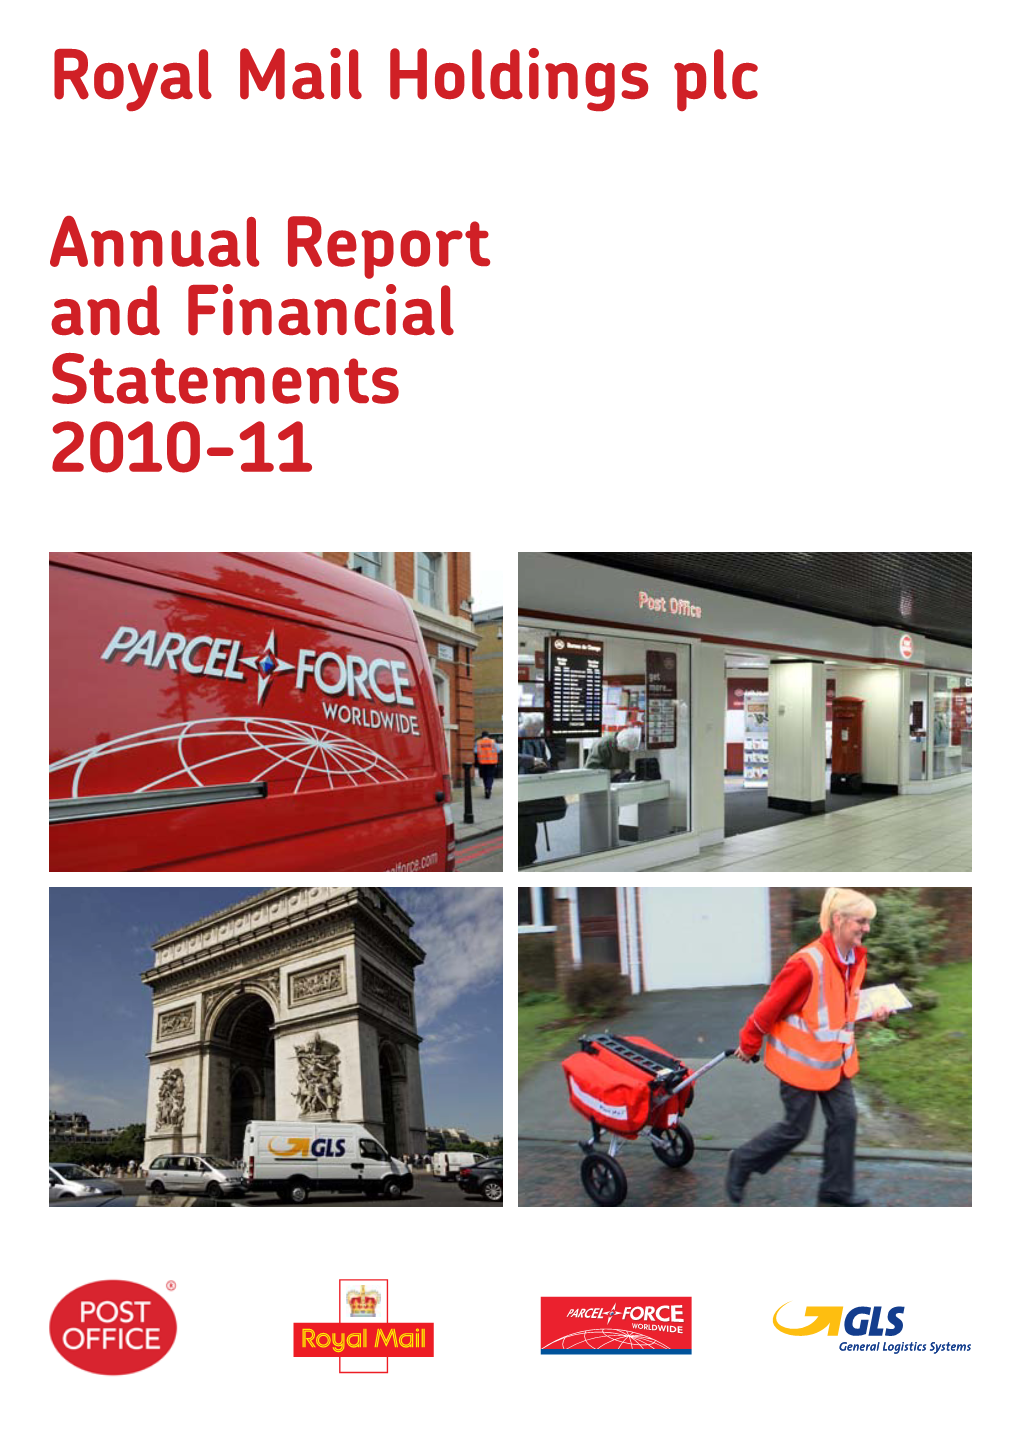 Royal Mail Holdings Plc Annual Report and Financial Statements